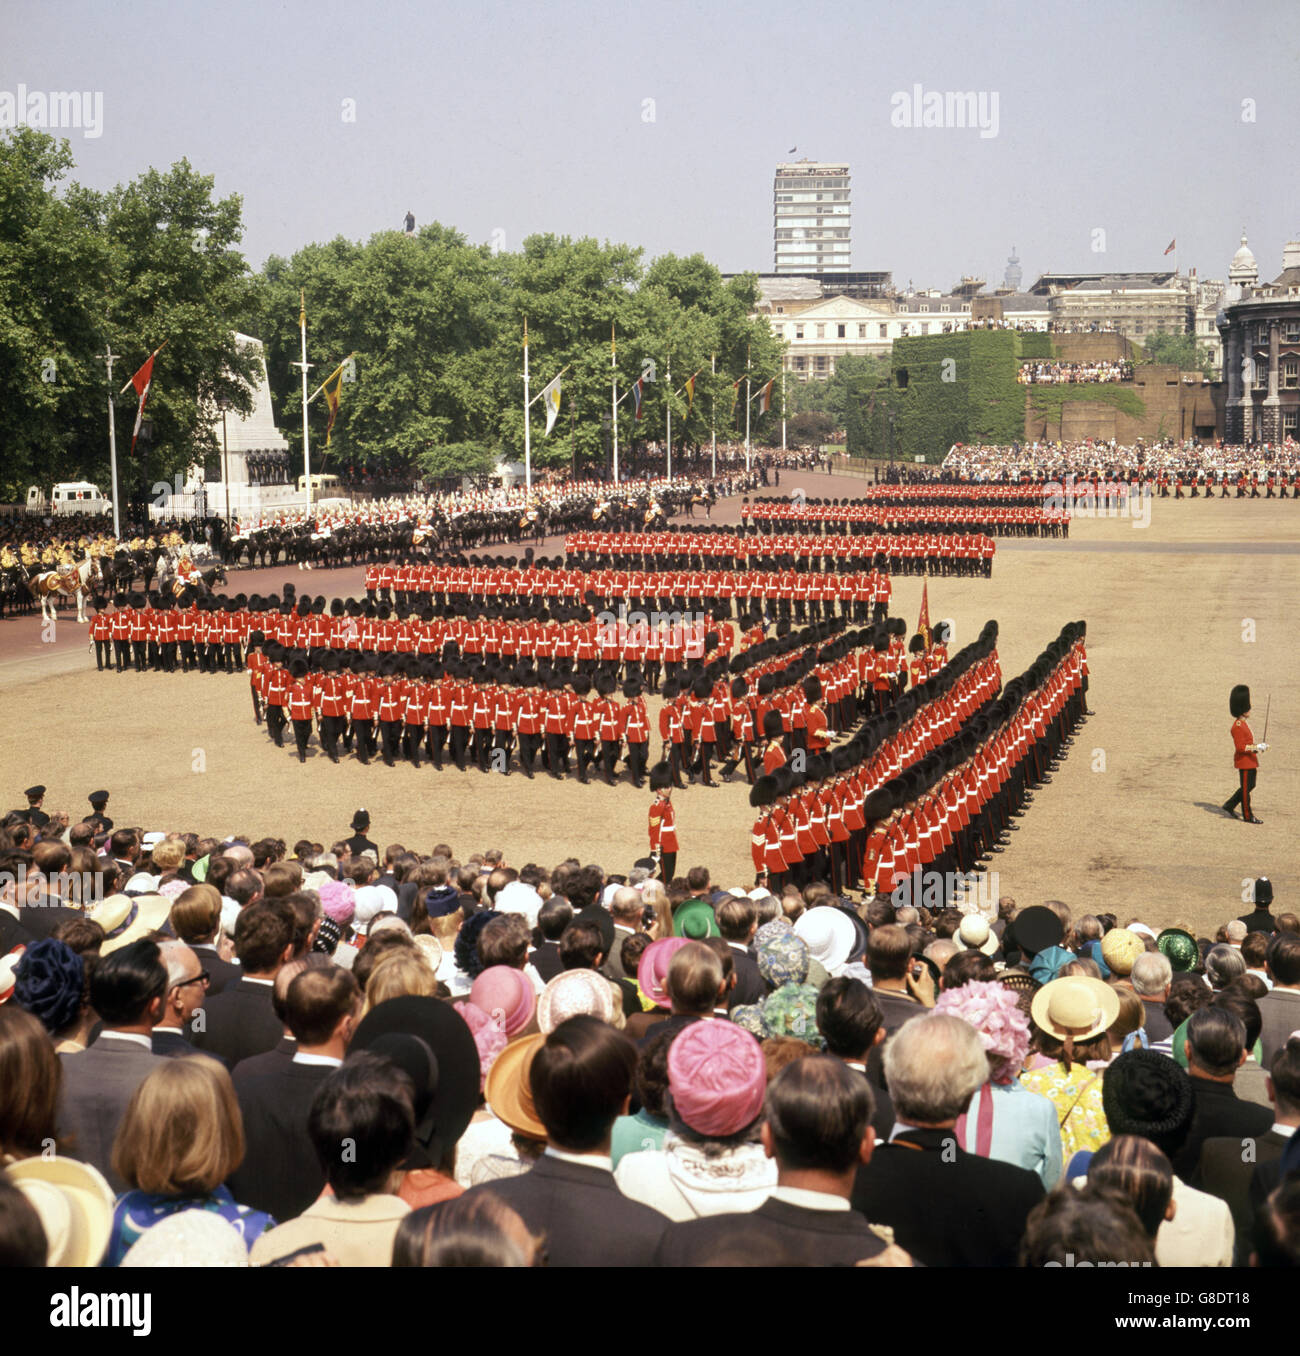 Royalty - Trooping the Colour - Horseguards Parade, London Stock Photo